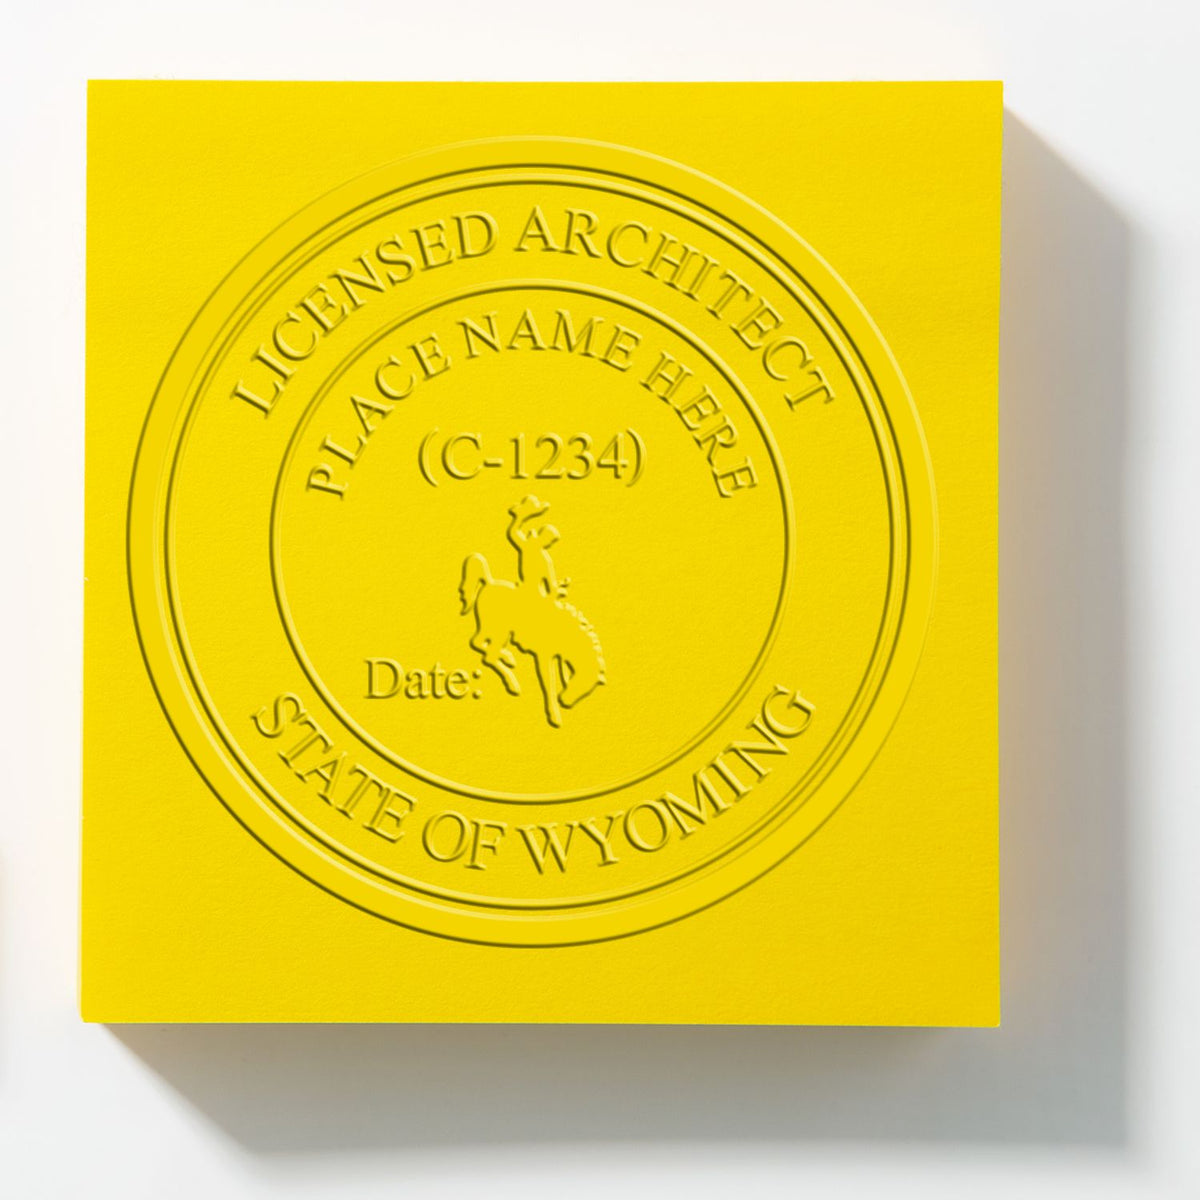 An in use photo of the Gift Wyoming Architect Seal showing a sample imprint on a cardstock